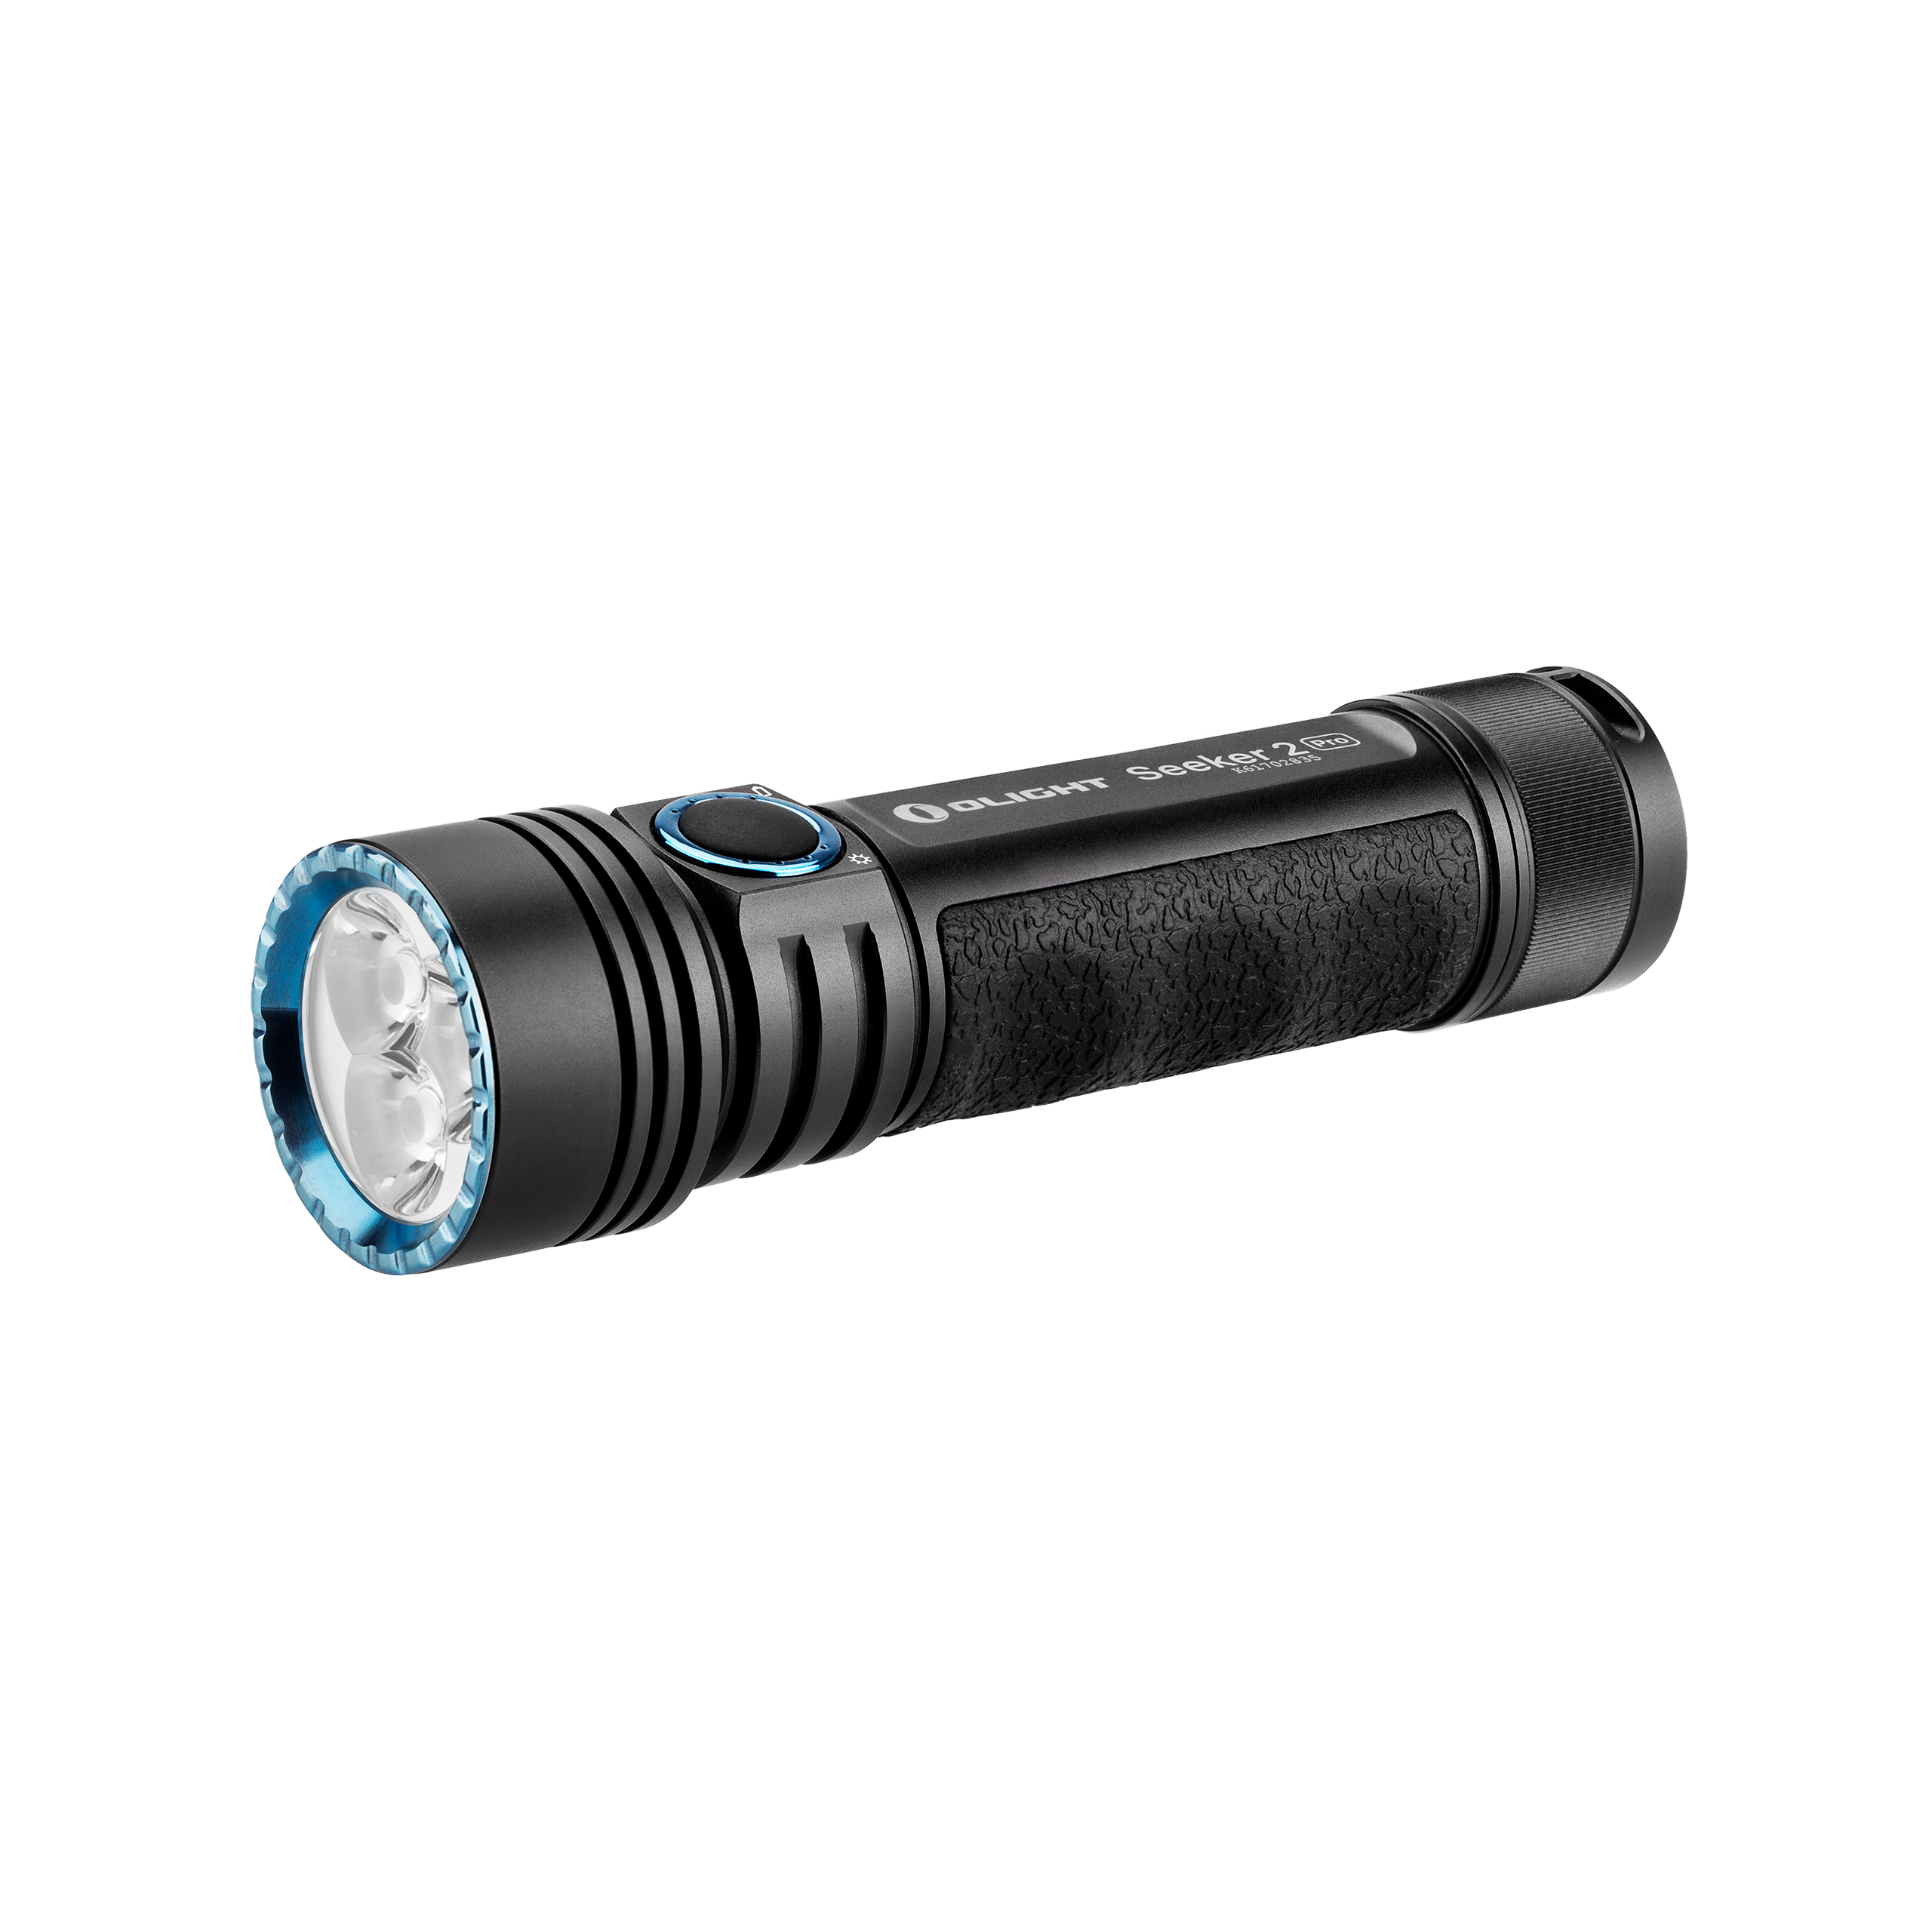 Olight Seeker 2 Pro | The Review Smiths